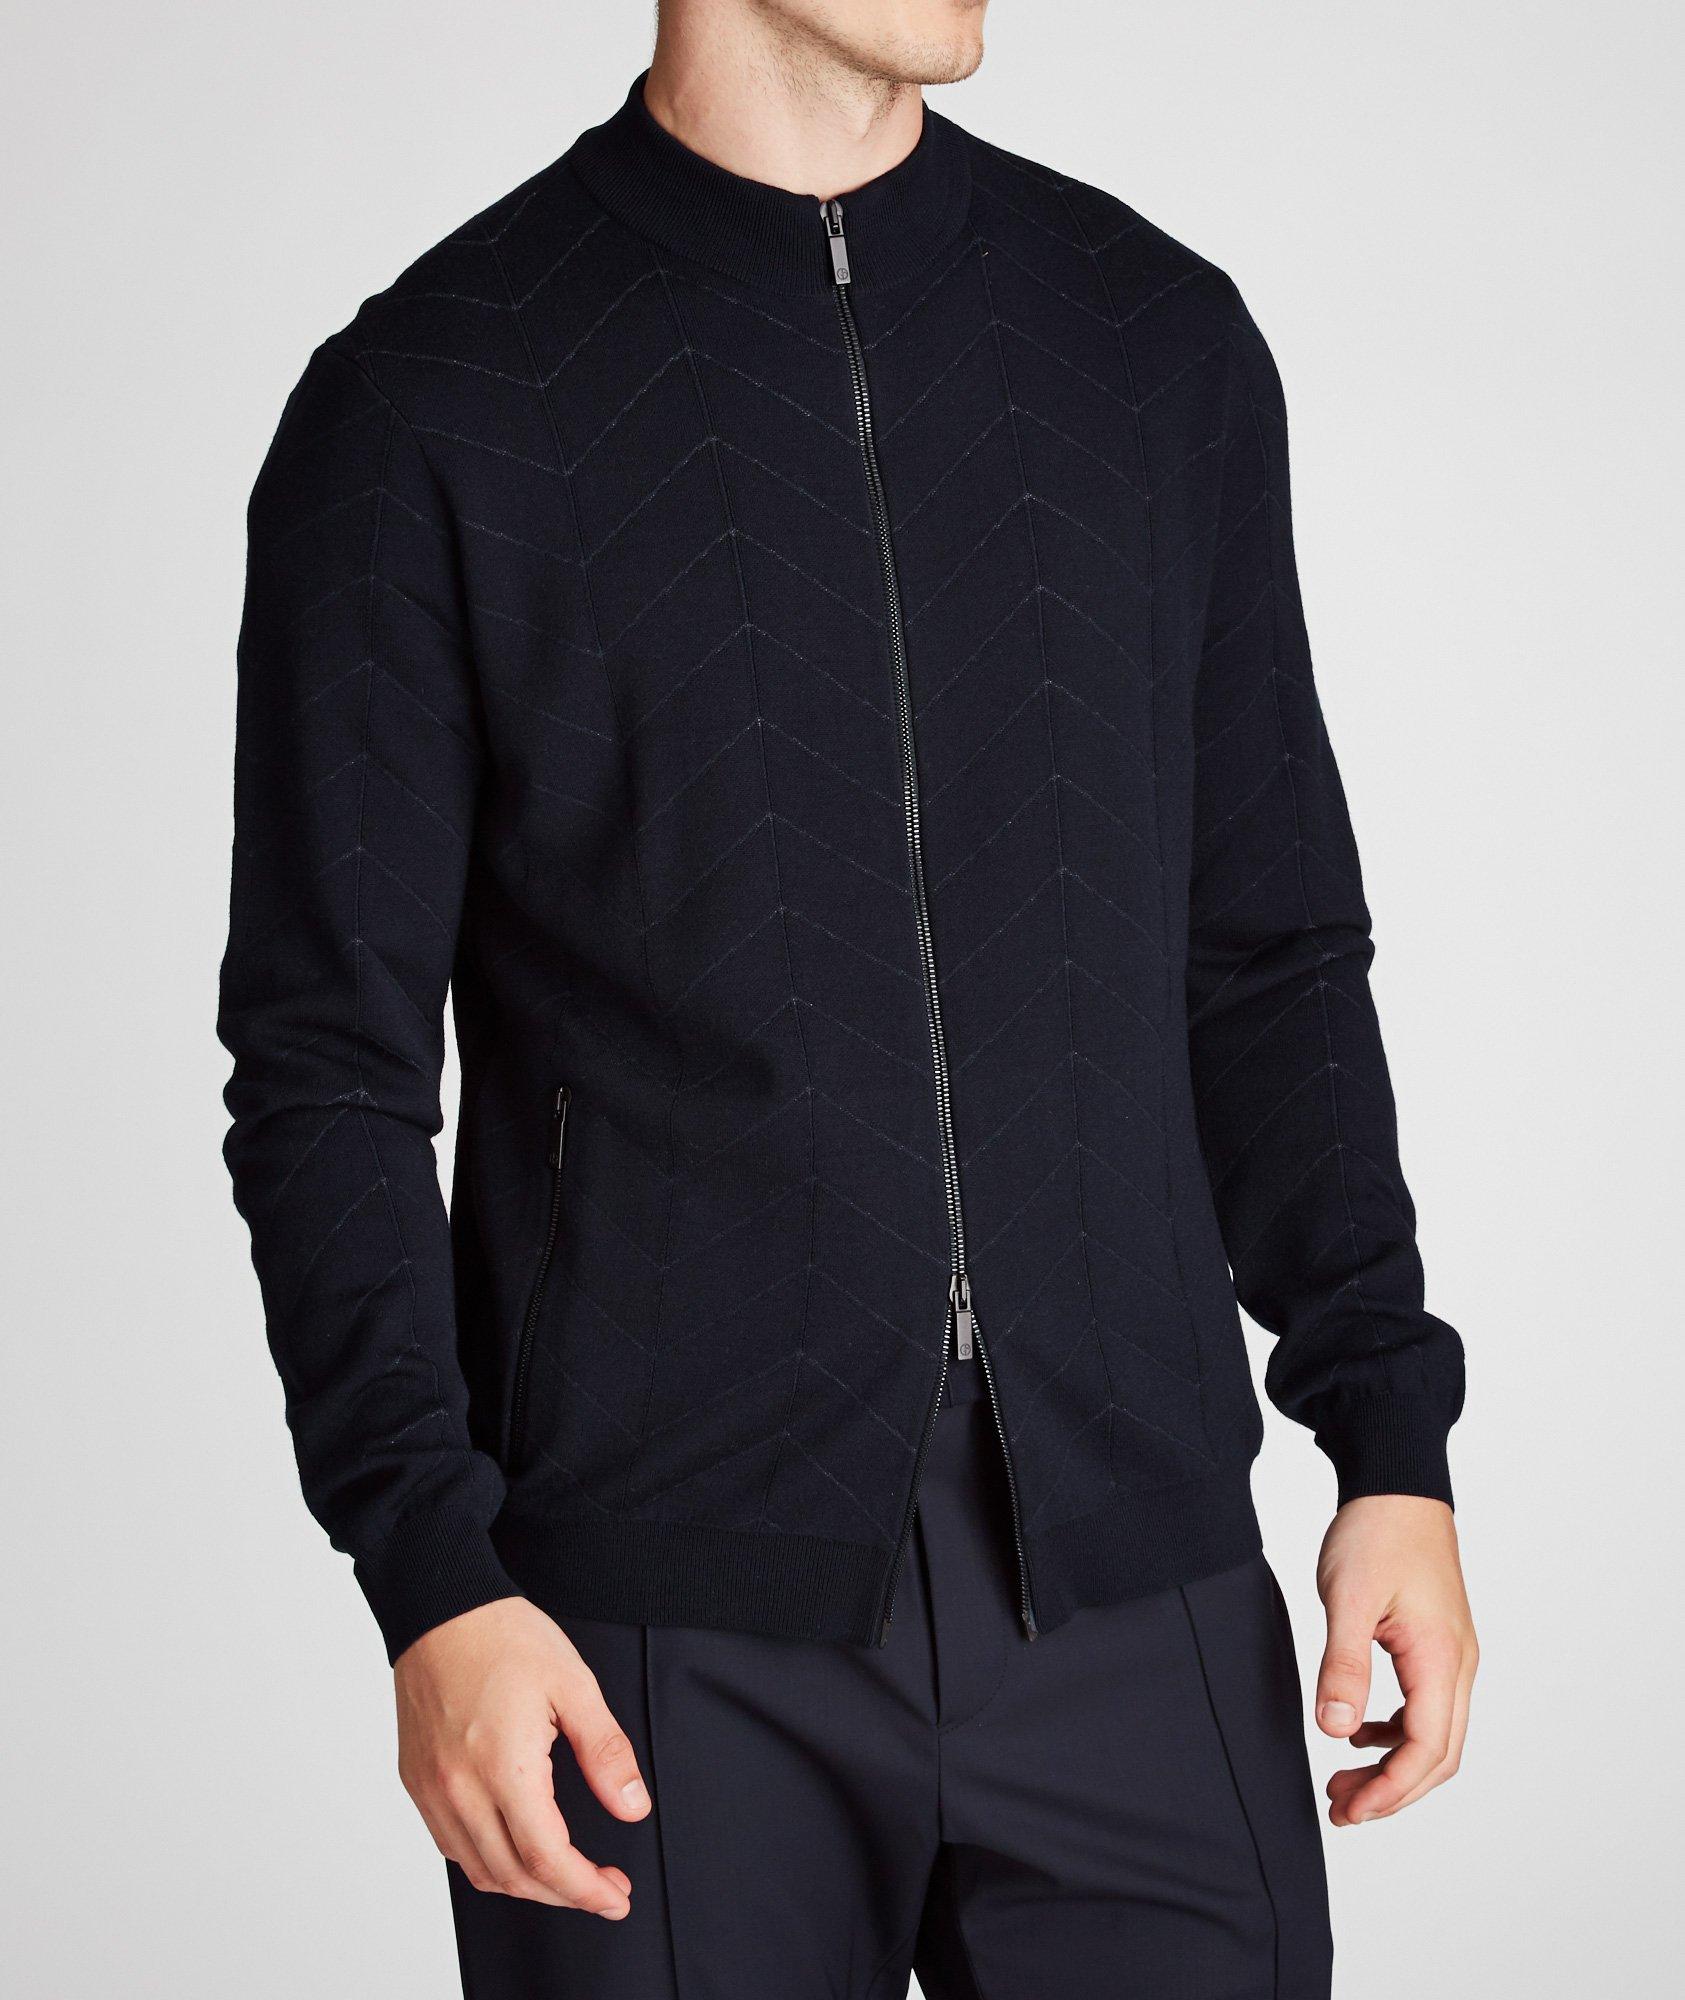 Zip-Up Stretch Wool Sweater image 0